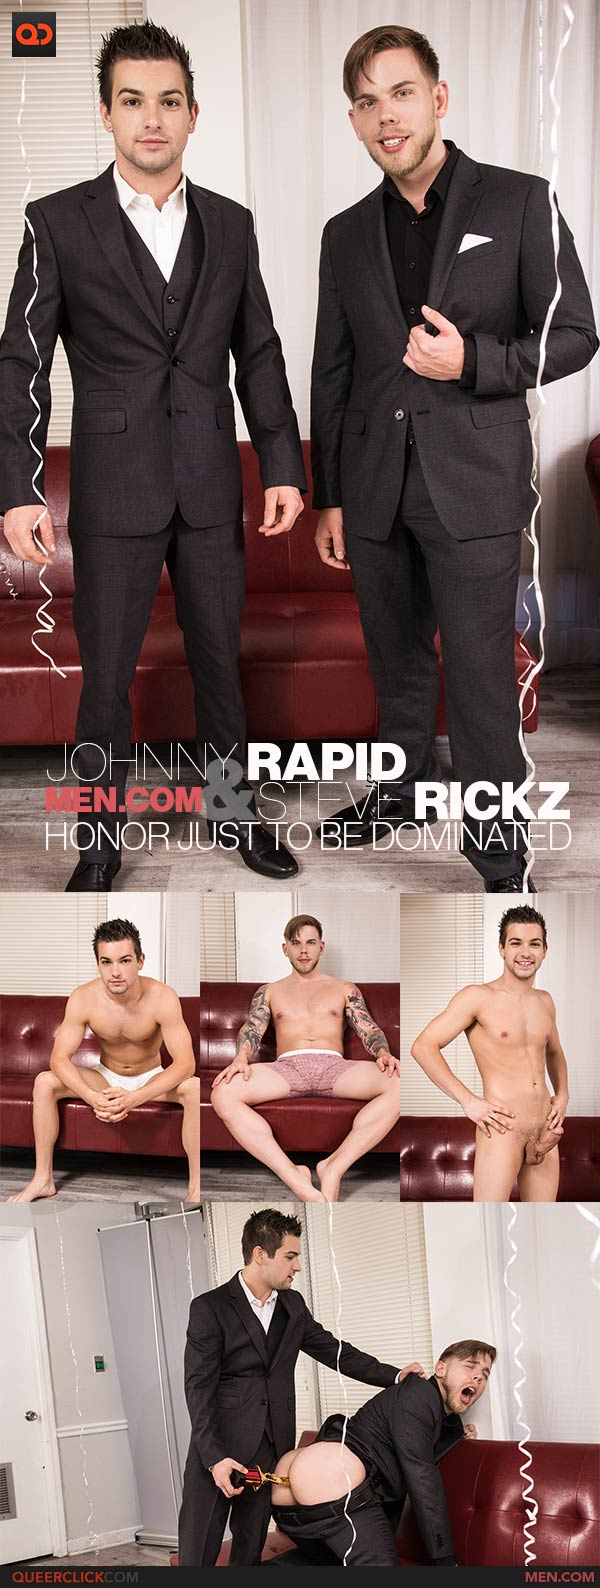 Men.com: Steve Rickz and Johnny Rapid - Honor Just to Be Dominated